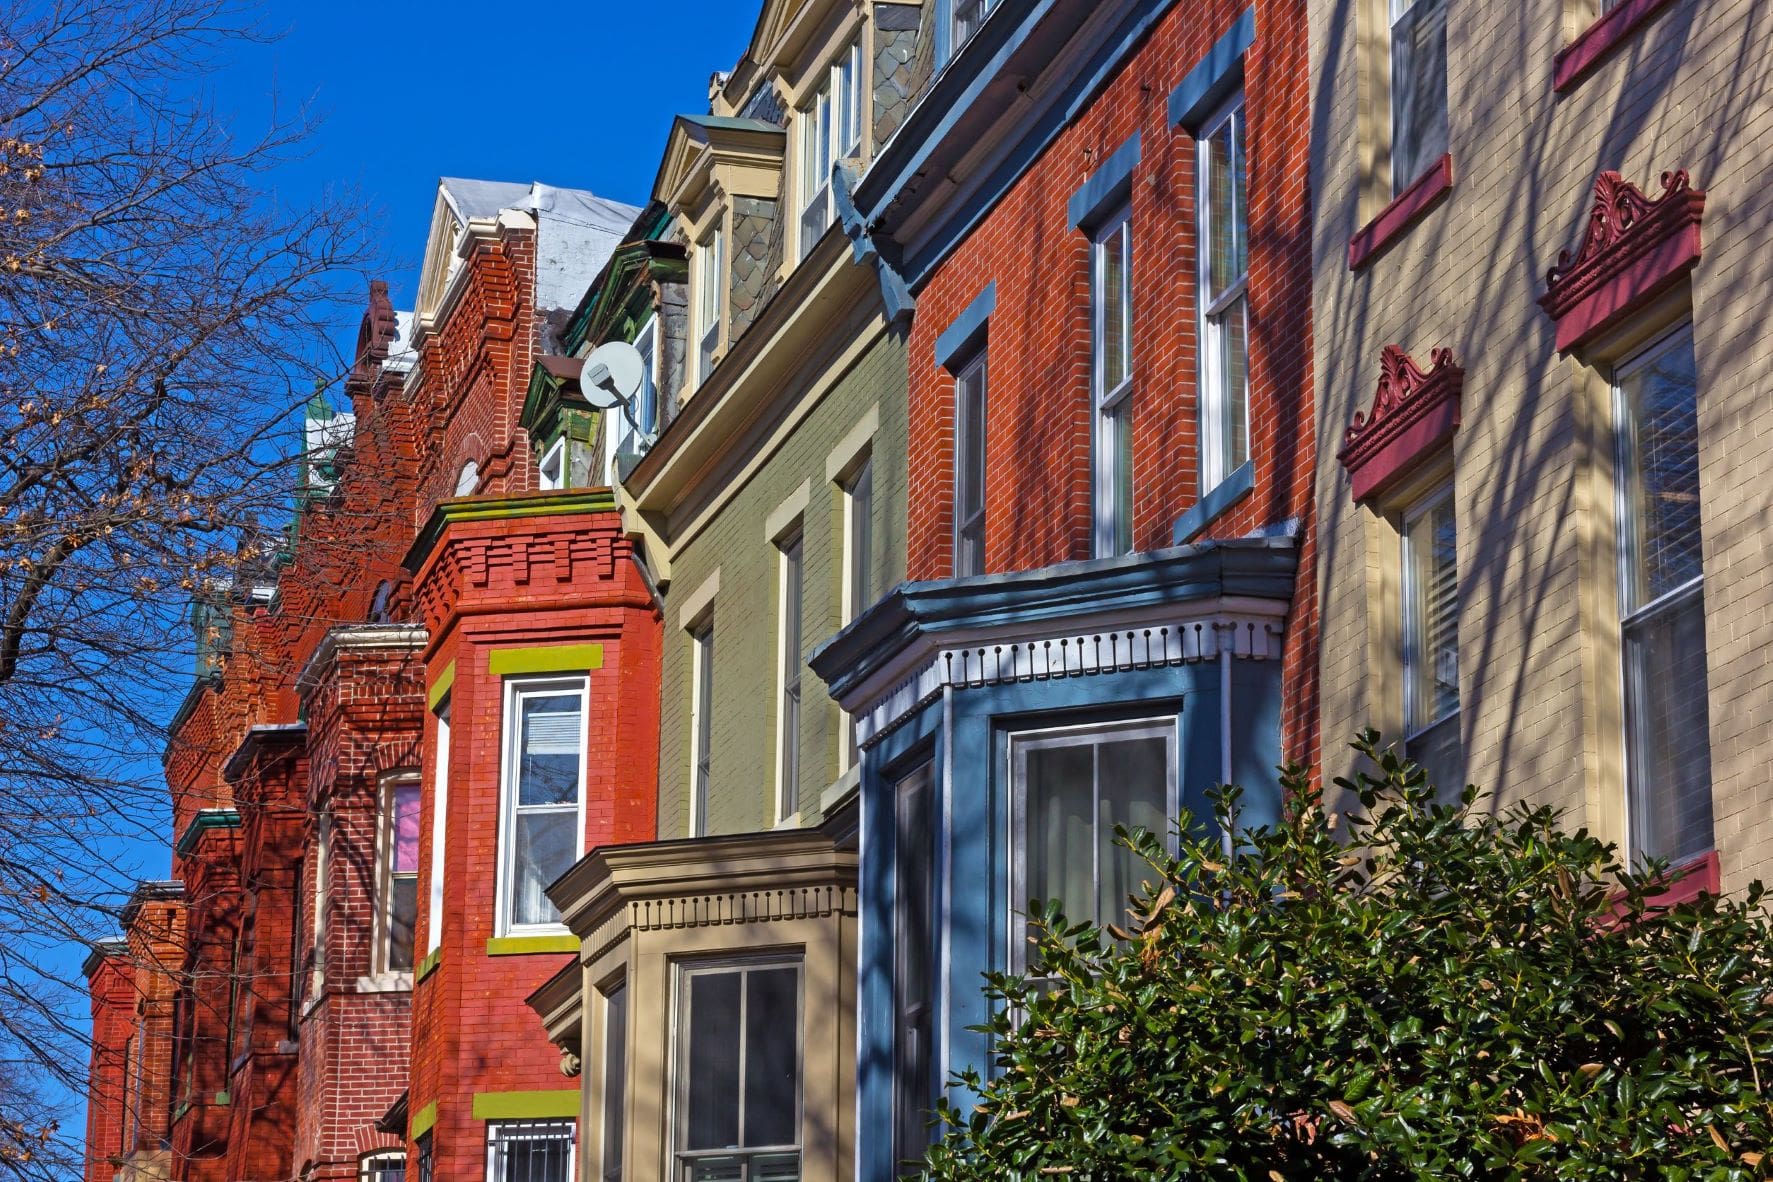 Colorful rowhouses viewed from below